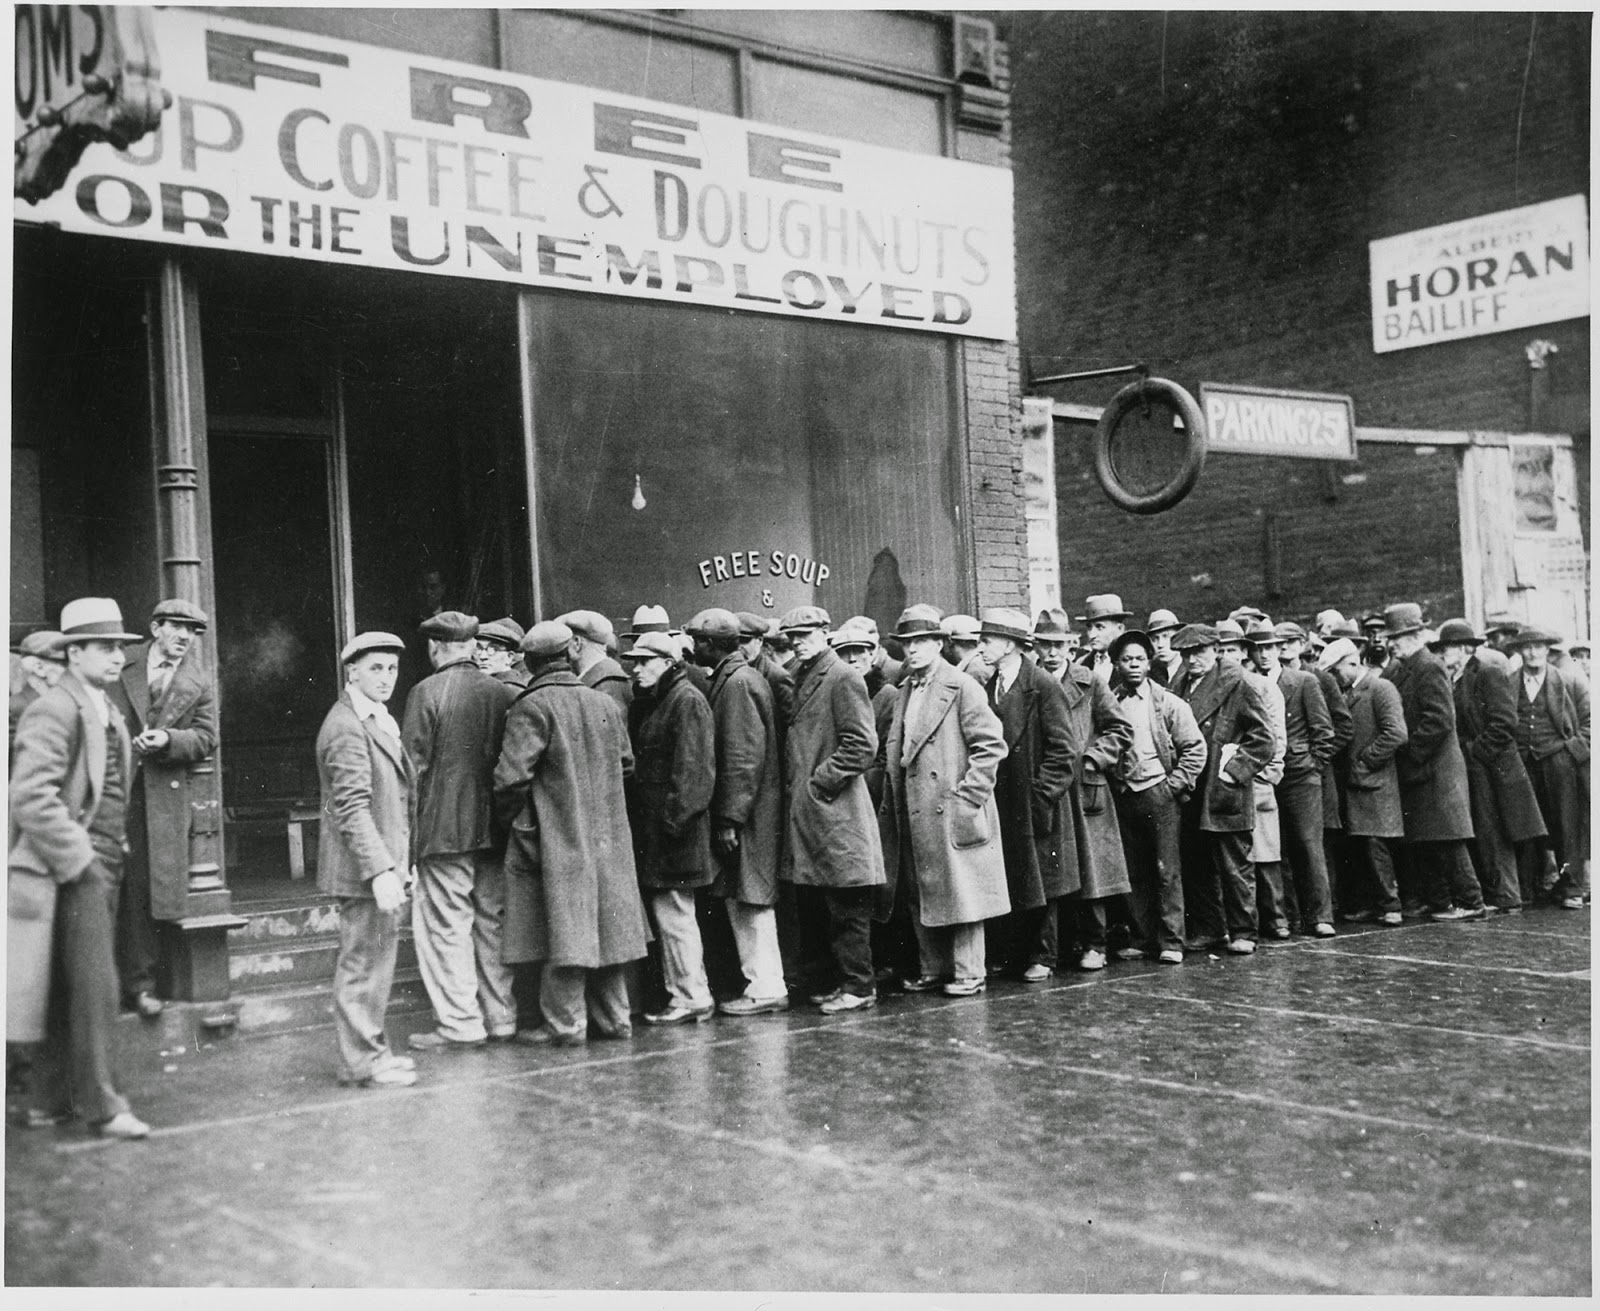 Al+Capone%27s+soup+kitchen+during+the+Great+Depression,+Chicago,+1931.jpg